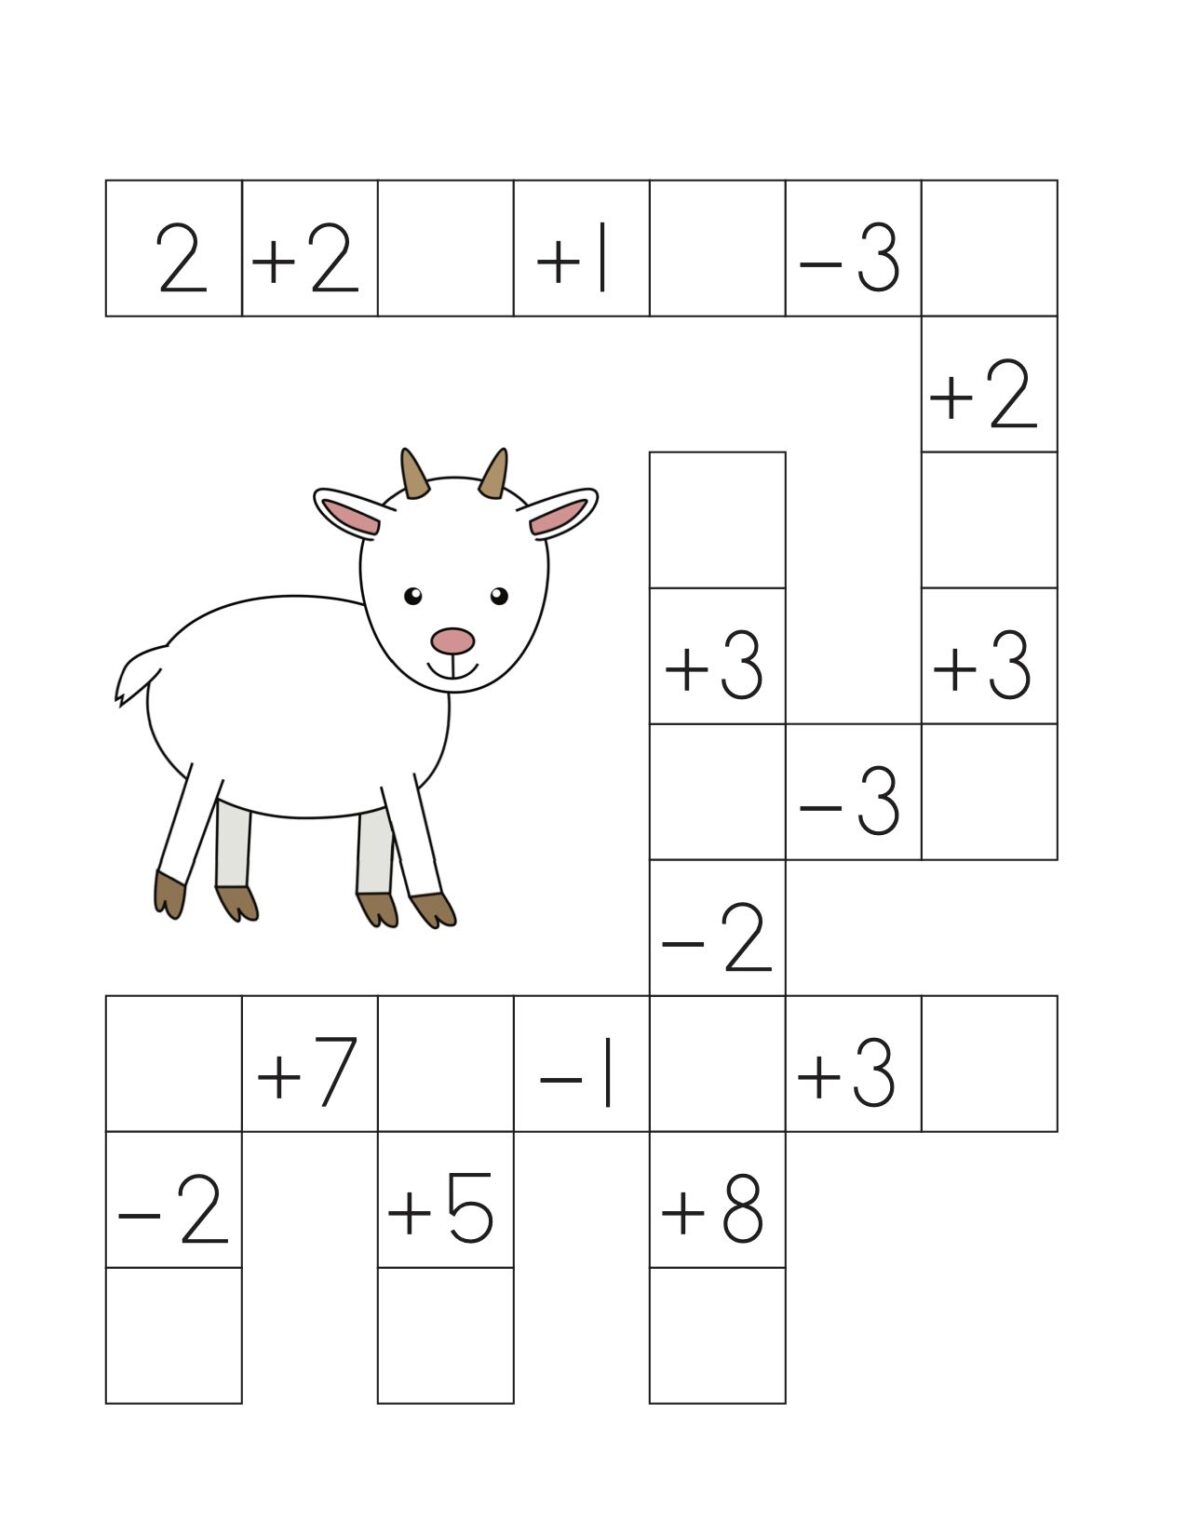 farm math puzzles addition and subtraction worksheets easy peasy